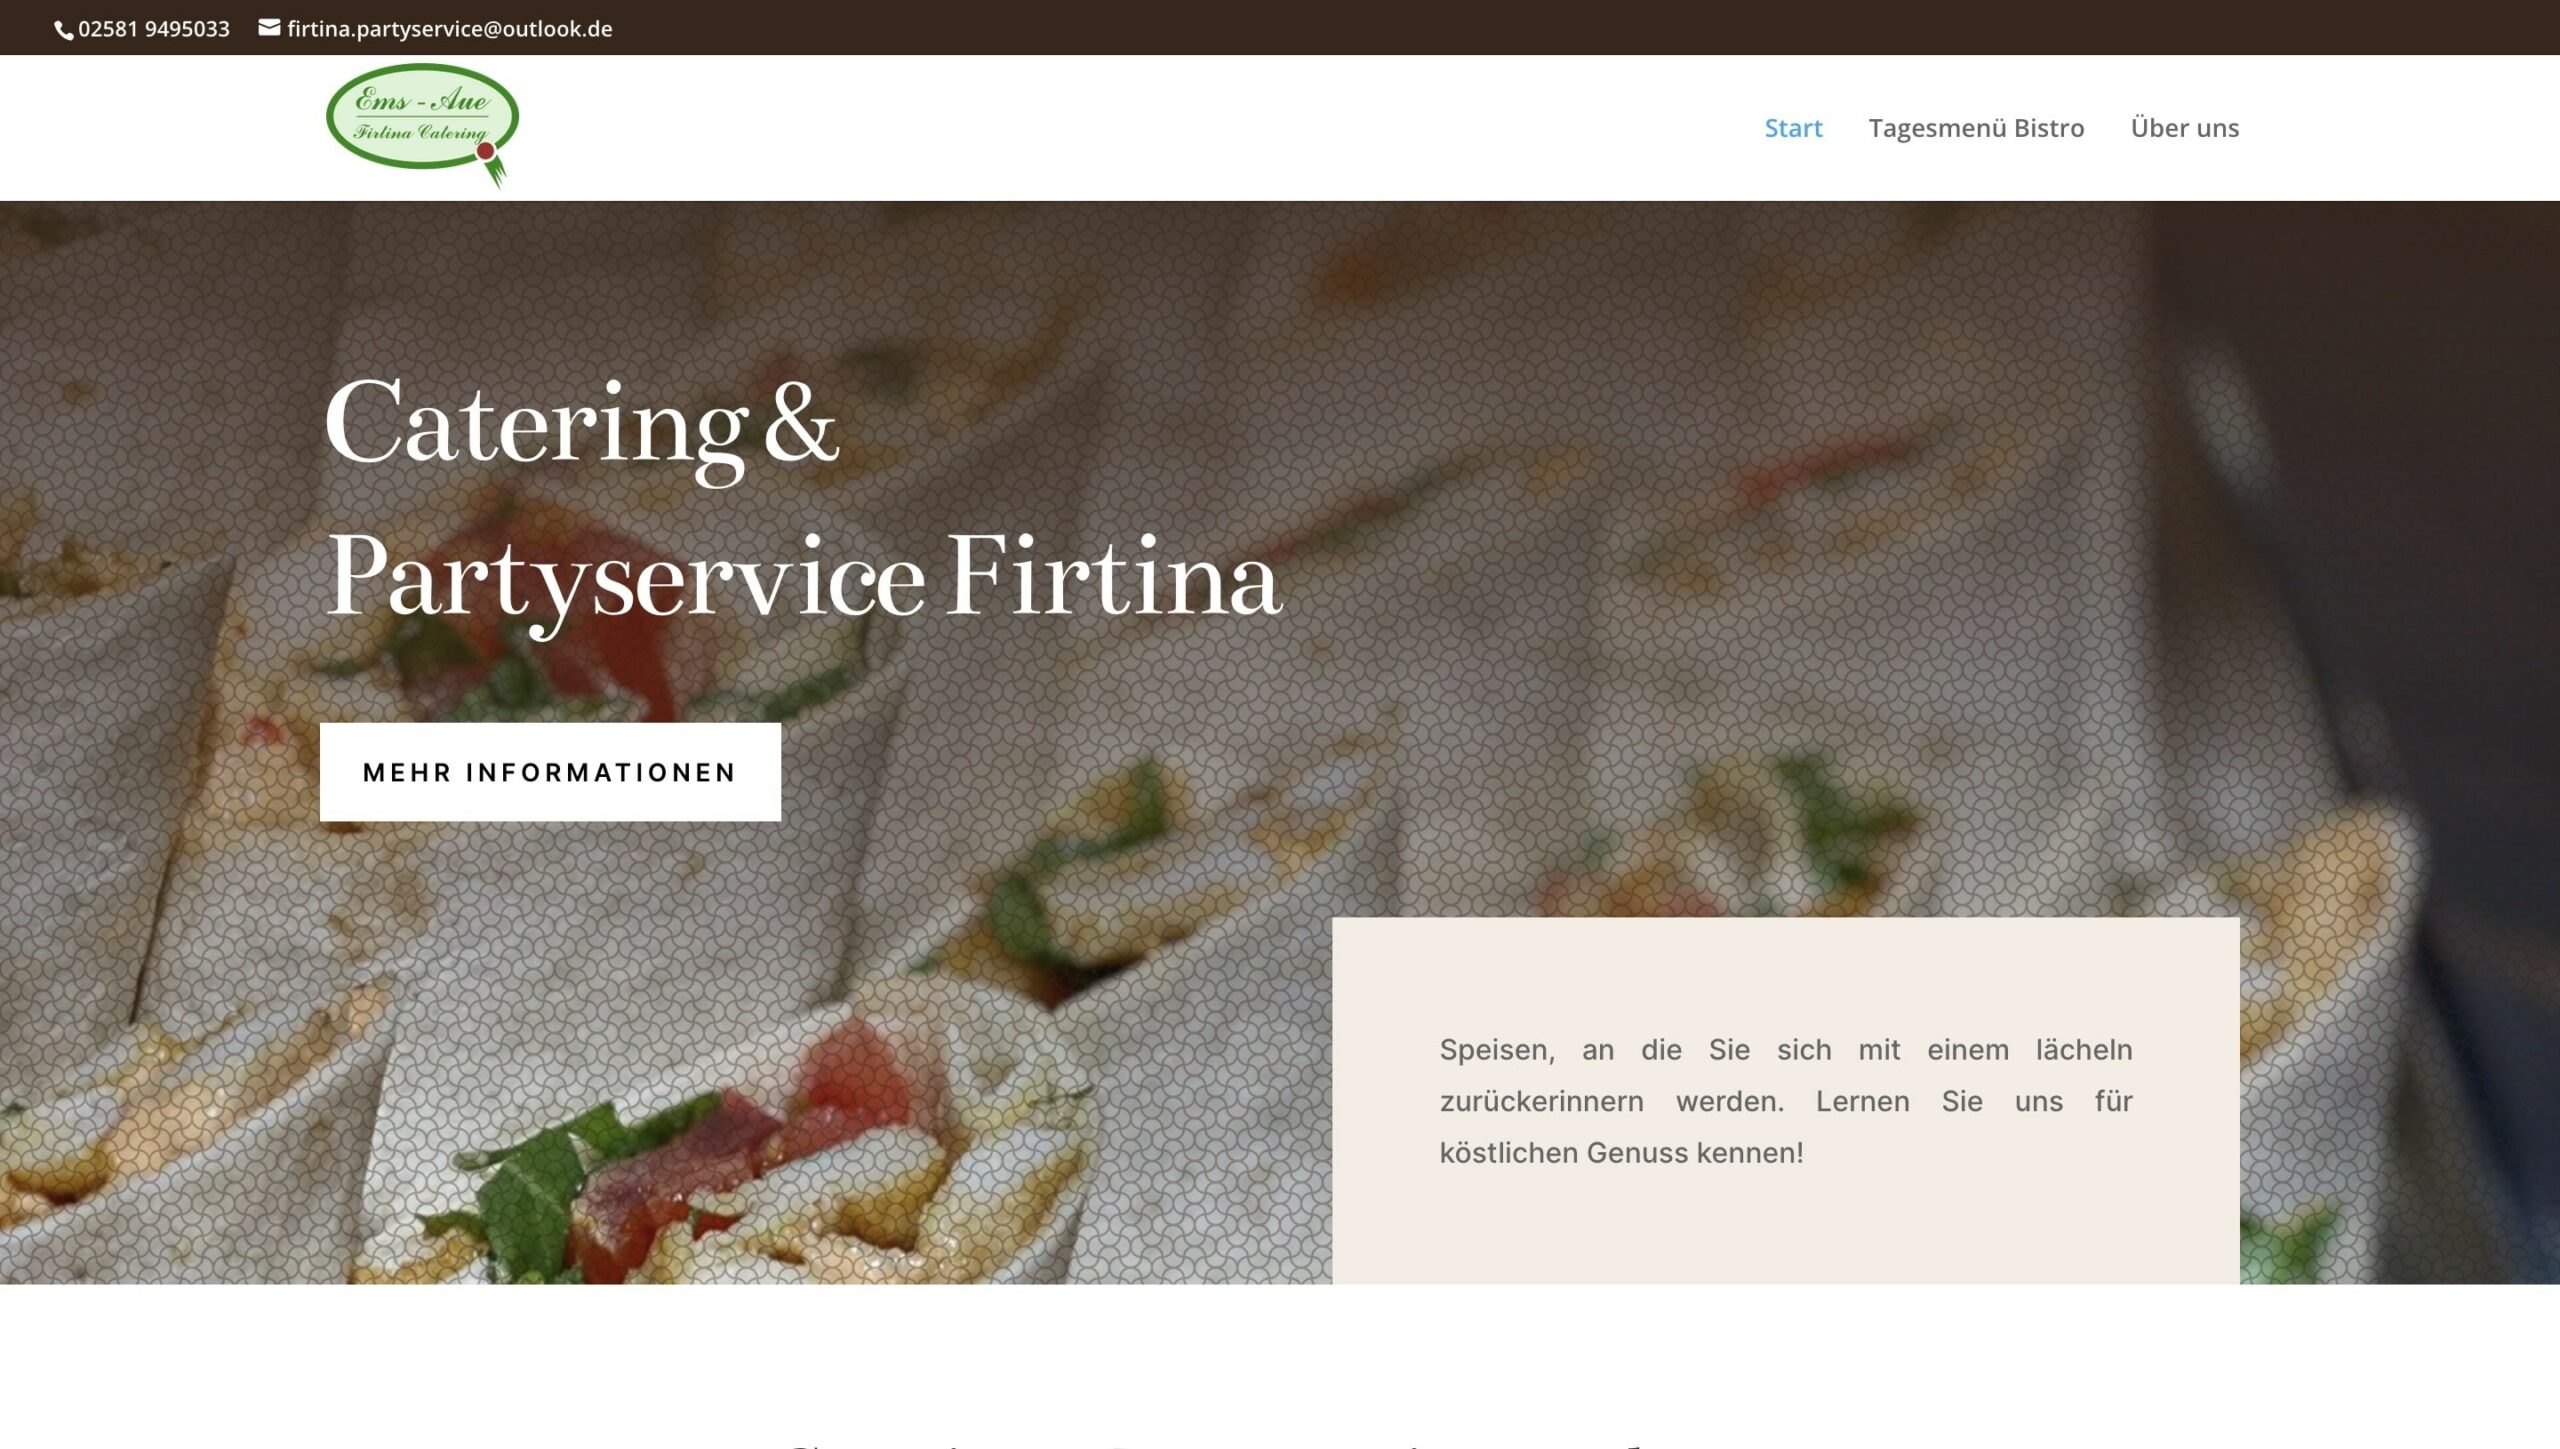 Firtina Catering Website erstellt Catering & Partyservice